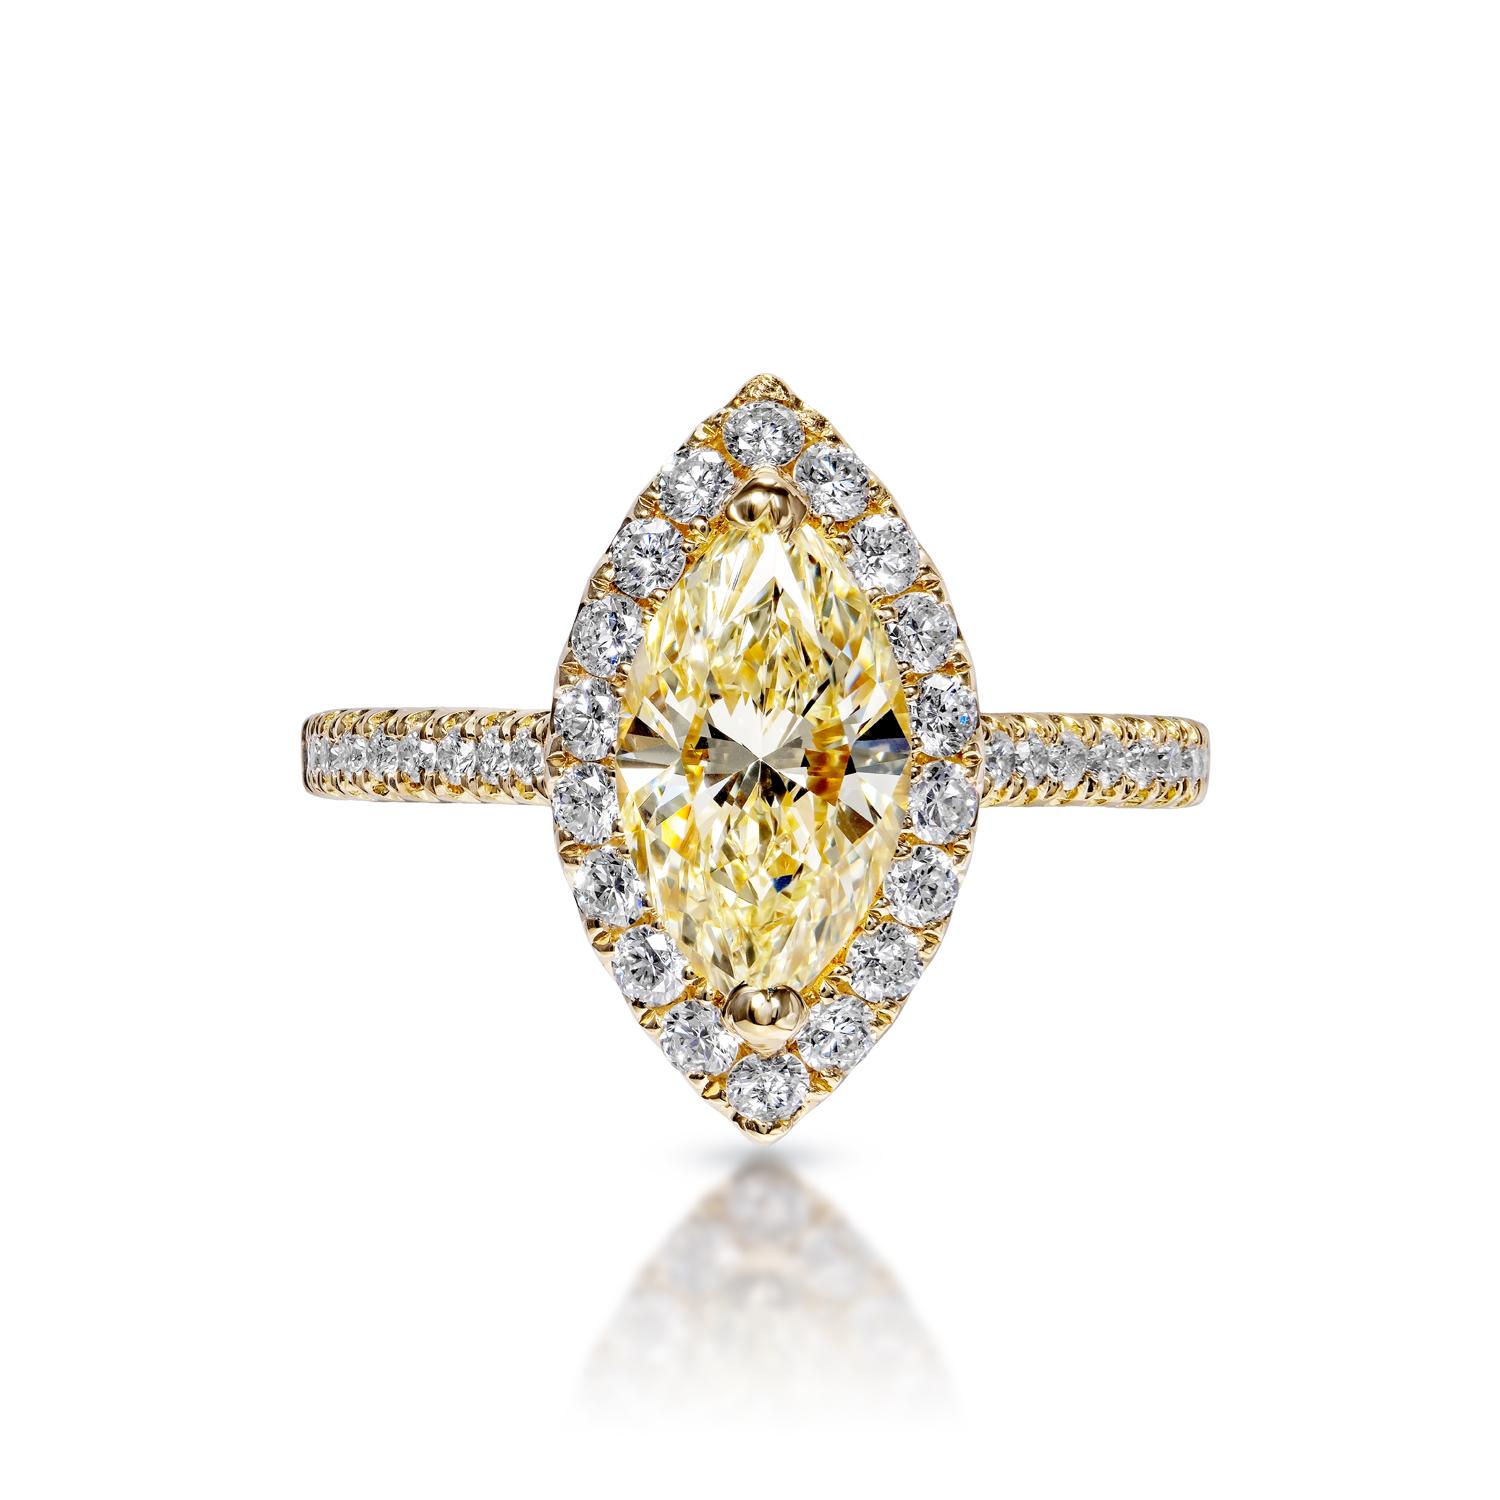 Earth Mined Center Diamond:
Carat Weight: 1.51 Carats
Color: Yellow Diamond
Clarity: VVS2
Style: Marquise Cut

Carat Weight: 0.56 Carats
Shape: Round Brilliant Cut
Setting: Sidestone & Halo 
Metal: 18 Karat Yellow Gold

Total Carat Weight: 2.06